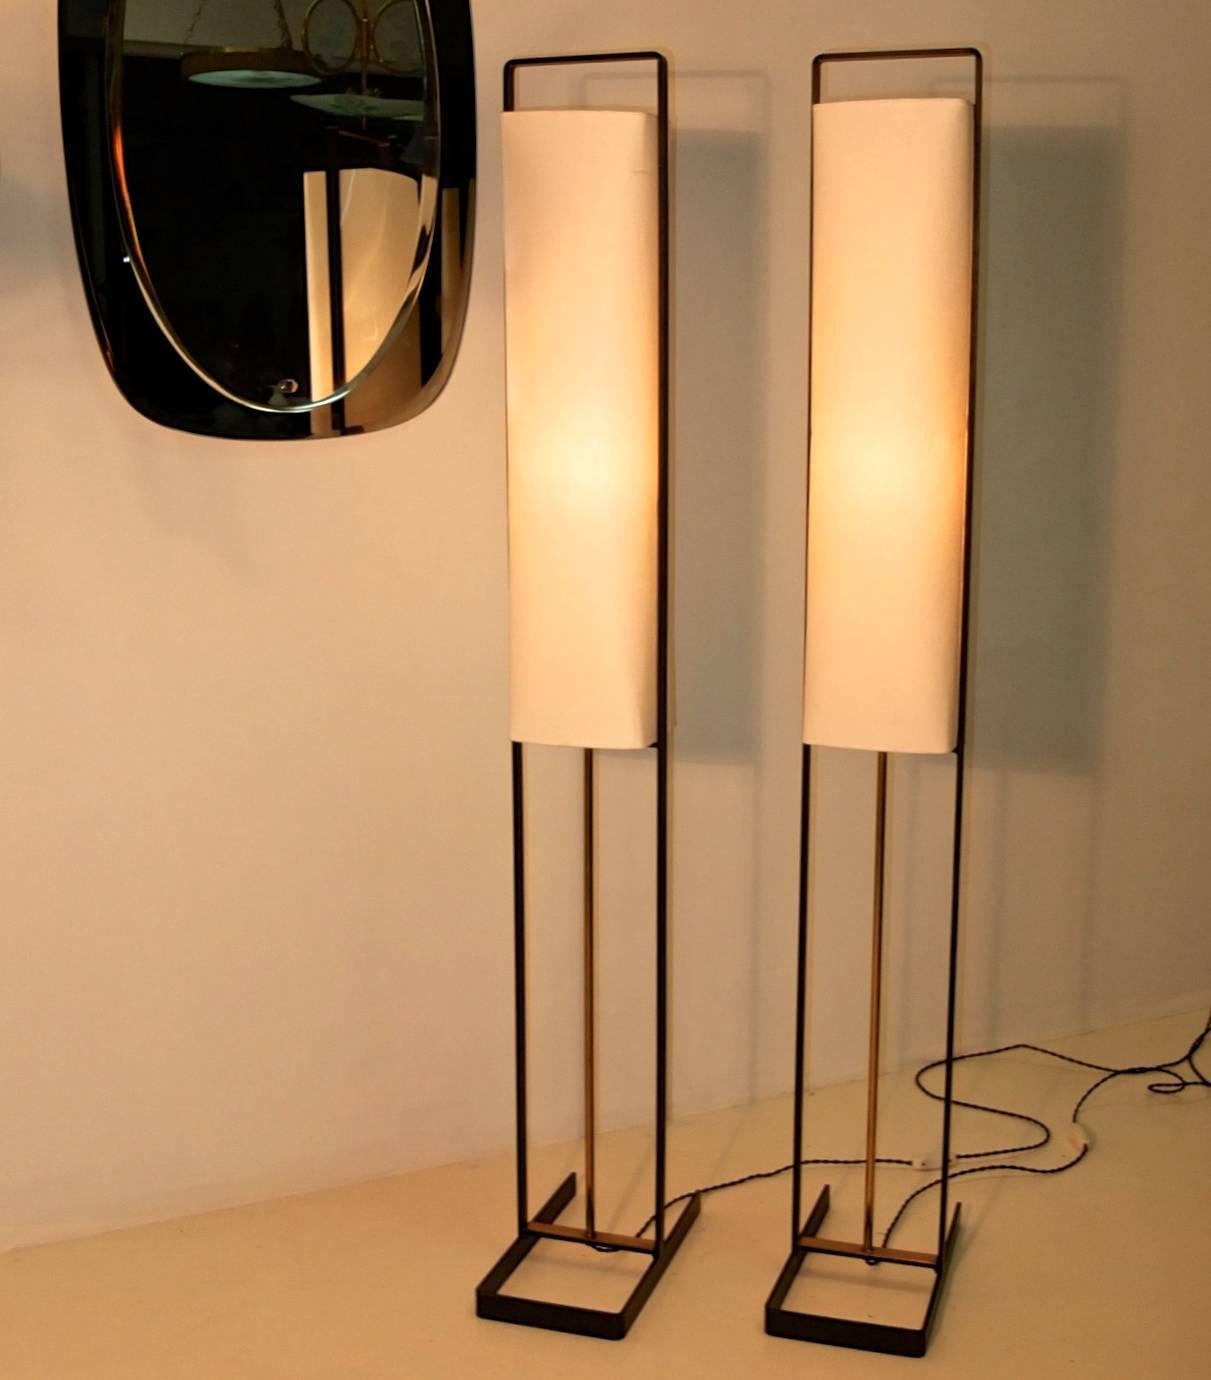 Pair of standing lamps attributed to Jean Boris Lacroix in blackened iron frame of rectilinear form with brass detailing. Lamping is a single 60 watt candelabra size bulb inside a white paper rectangular box shade. Rewired. On/off switch on black